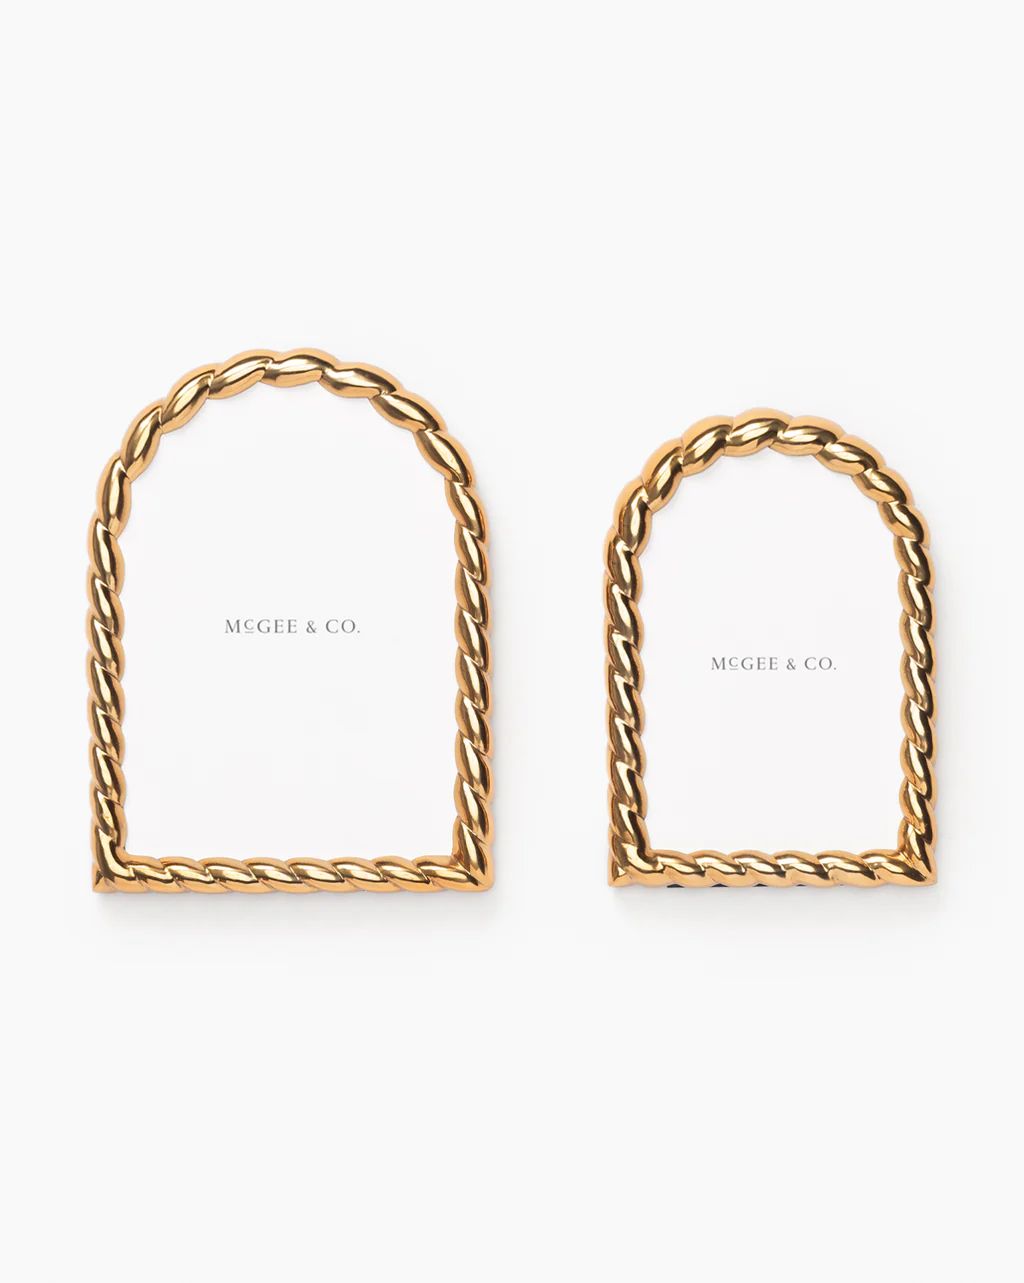 Yvette Picture Frame | McGee & Co. (US)